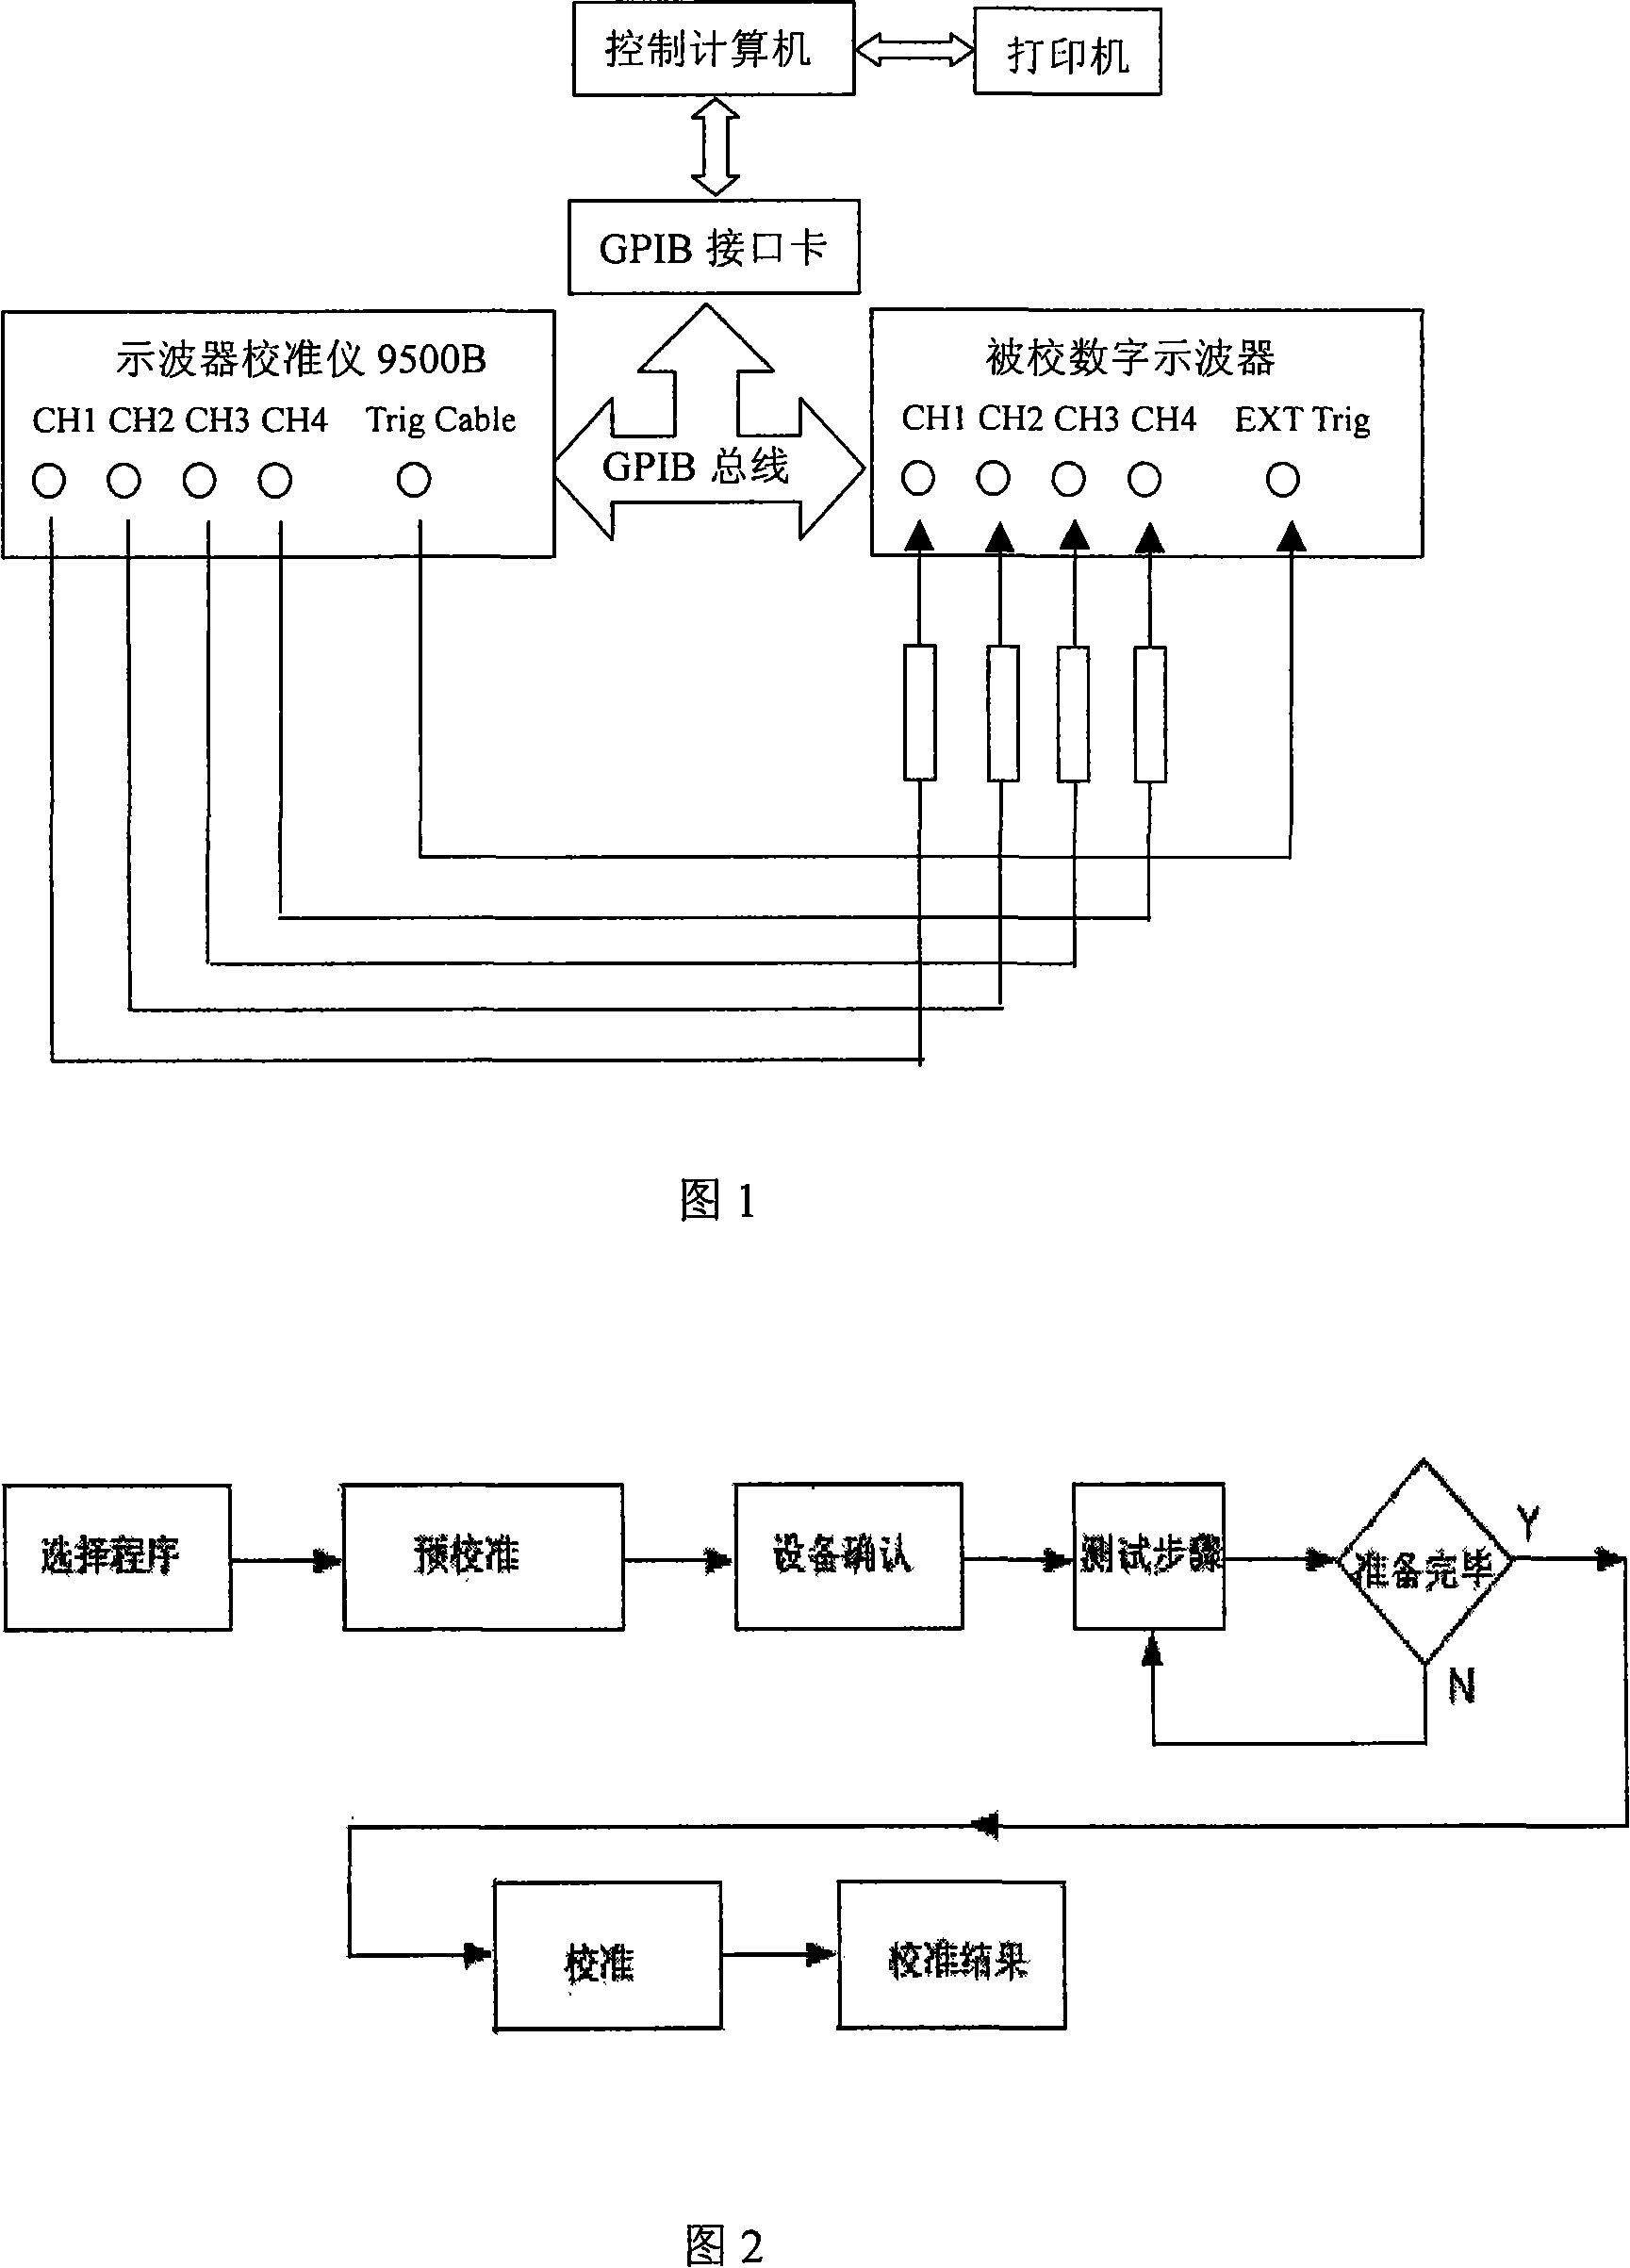 Frequency span calibration and detection method for digital oscilloscope